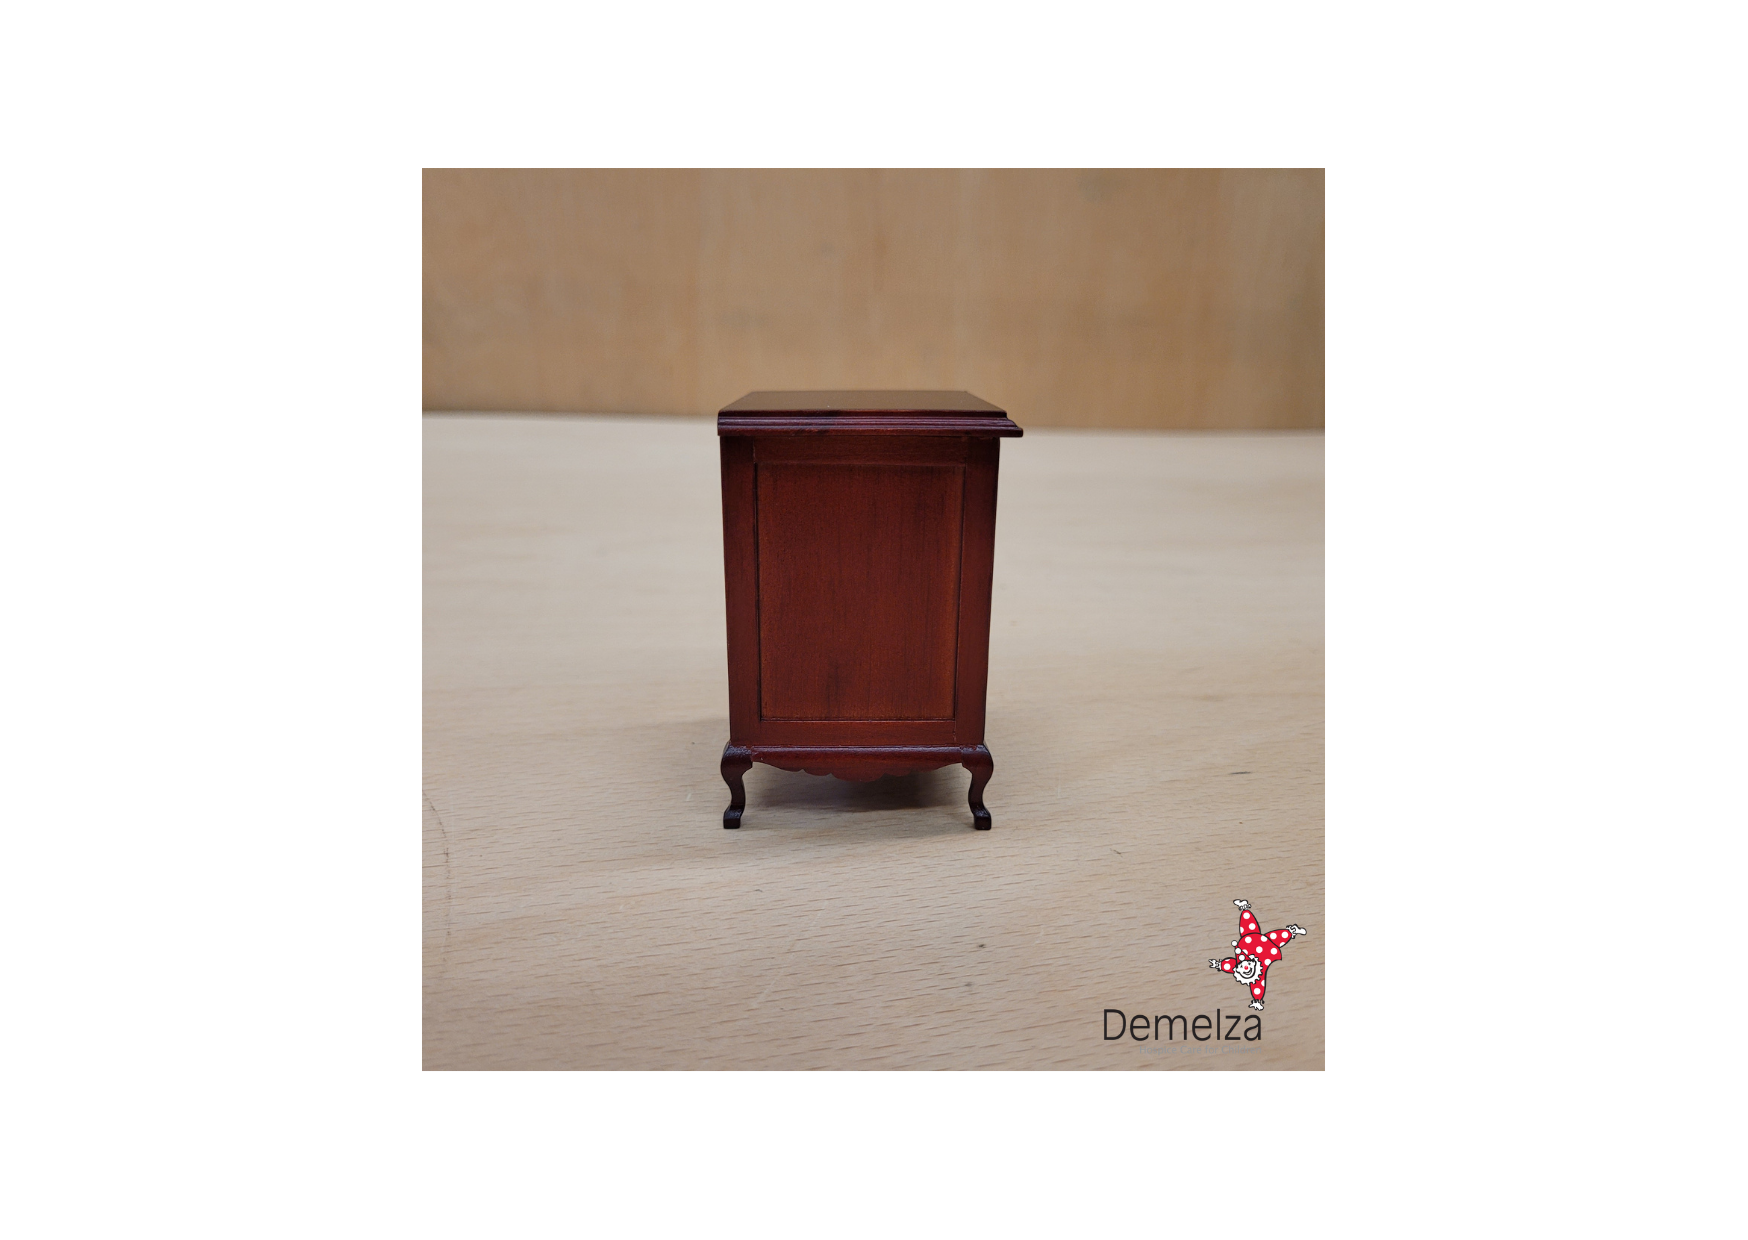 Dolls House 1:12 Scale Mahogany TV Unit Side View